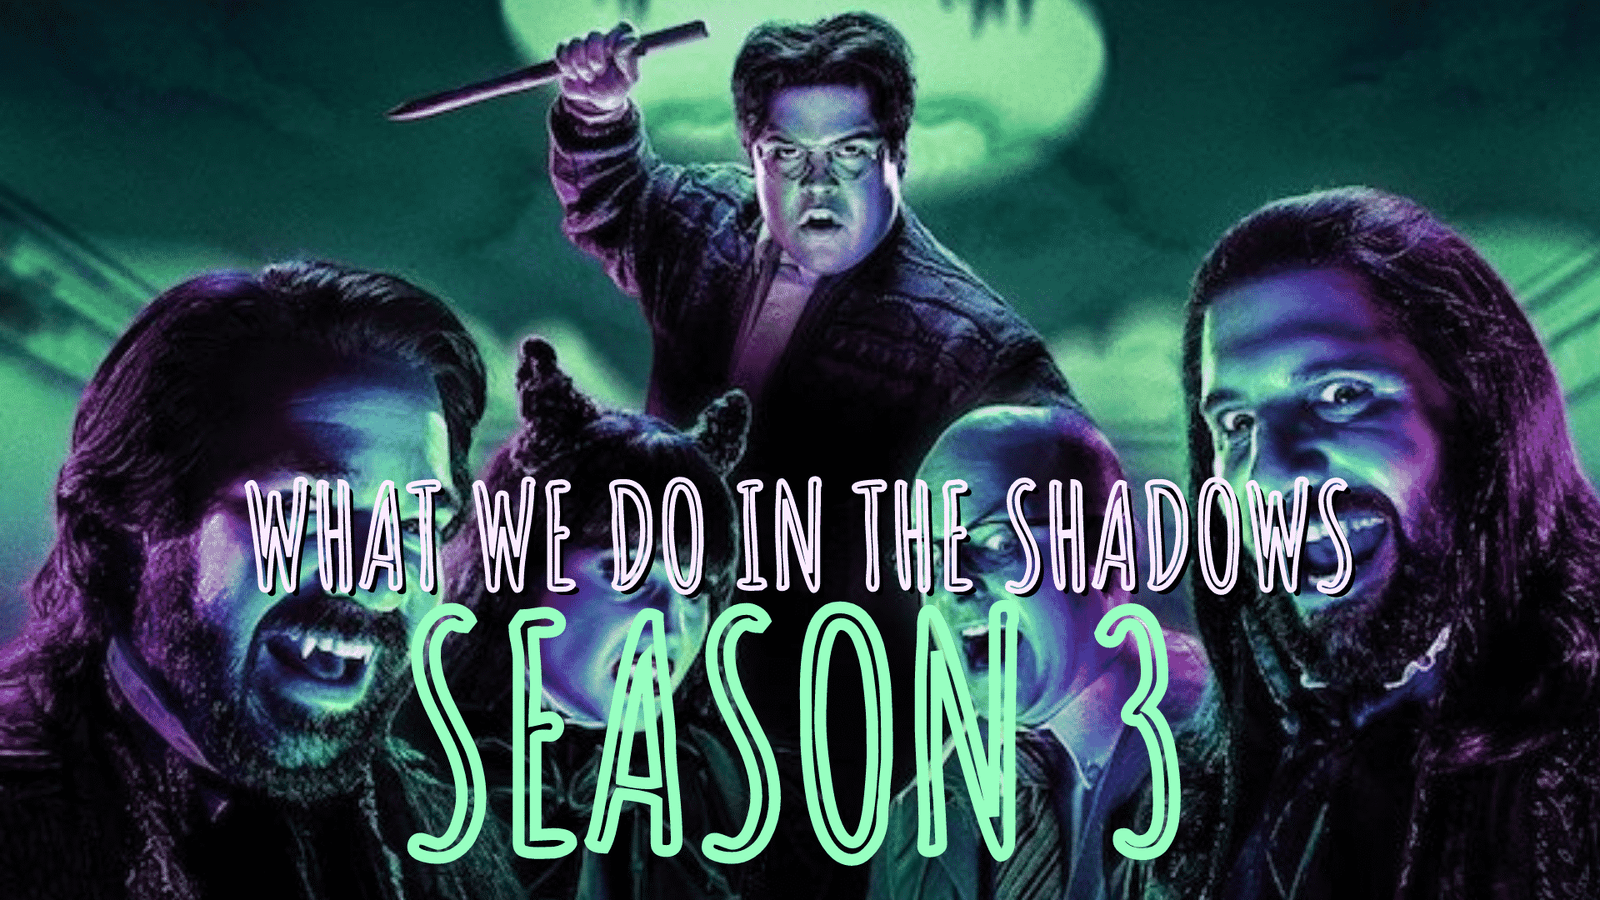 What We Do In The Shadows poster.